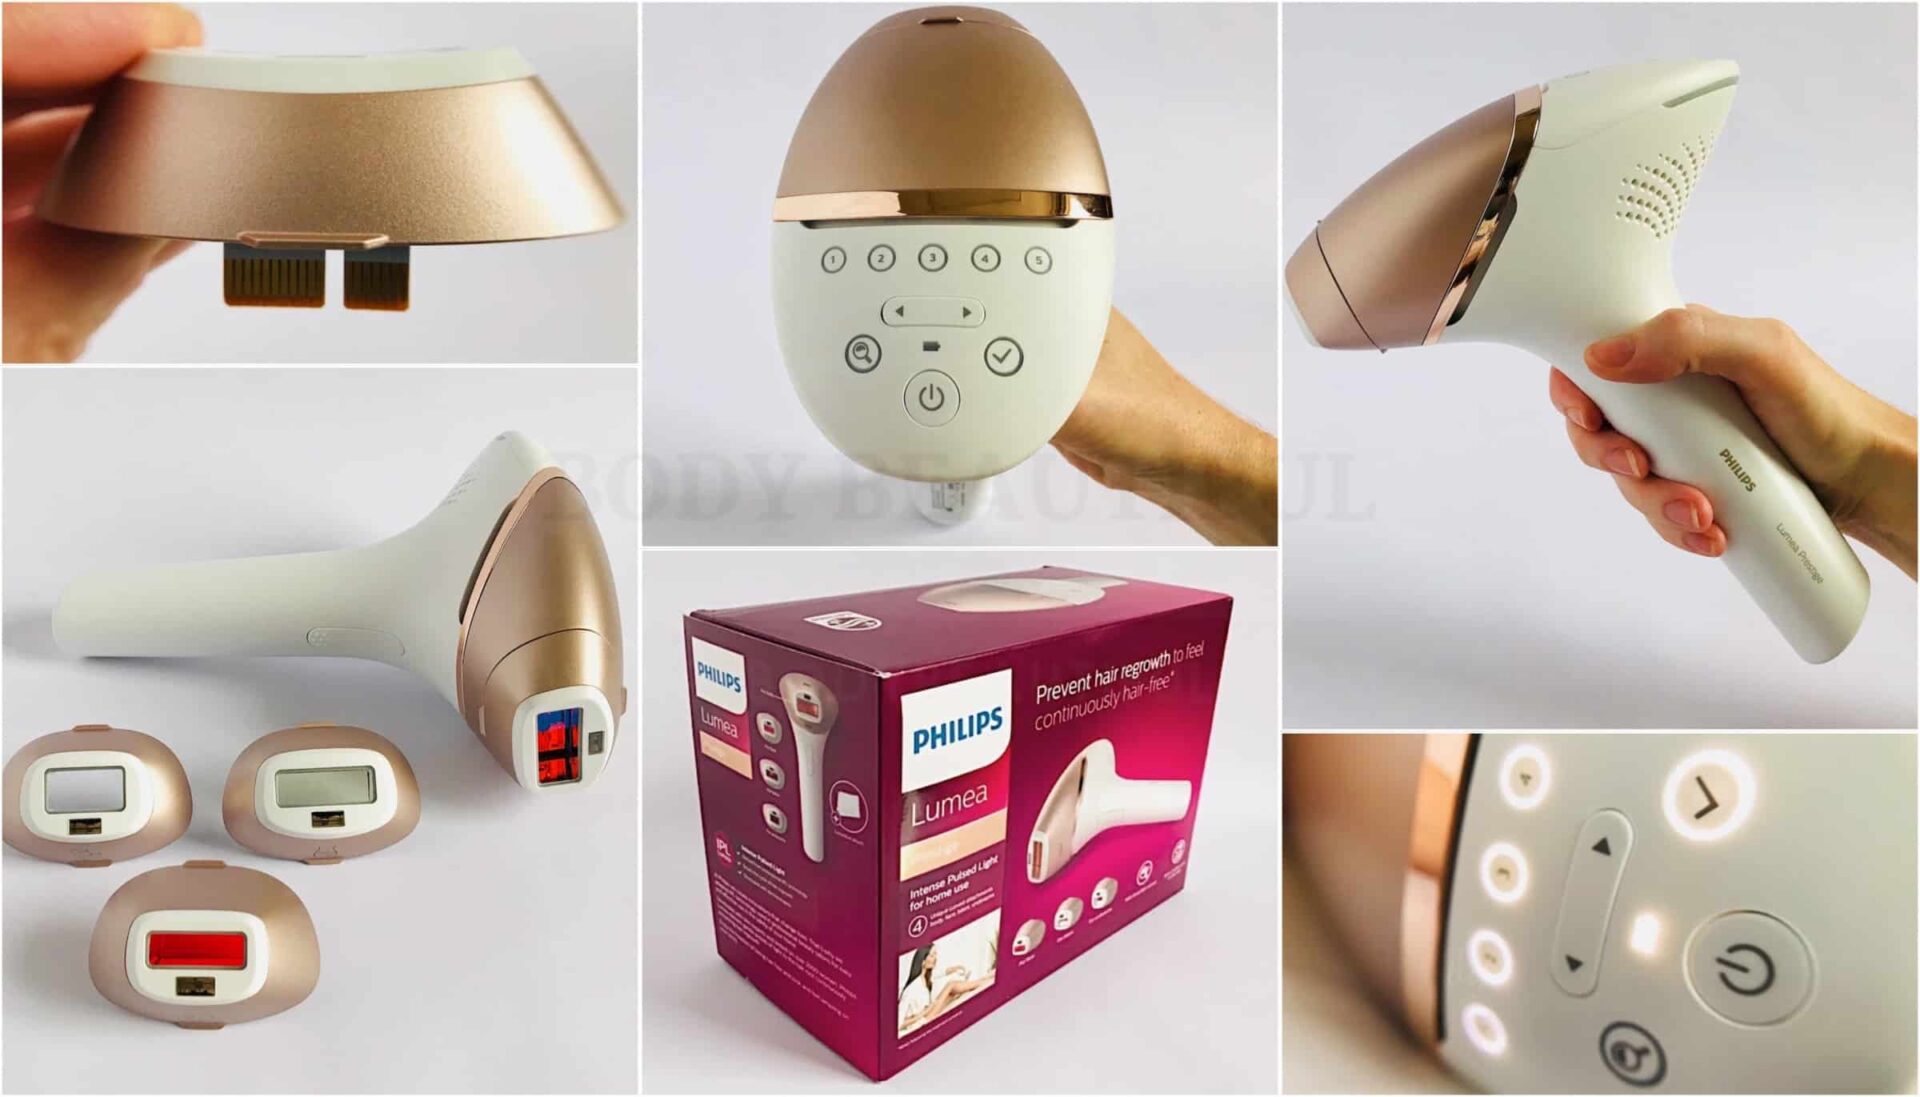 Decent Forbid Demonstrate Tried-&-tested Philips Lumea Prestige review & summary video